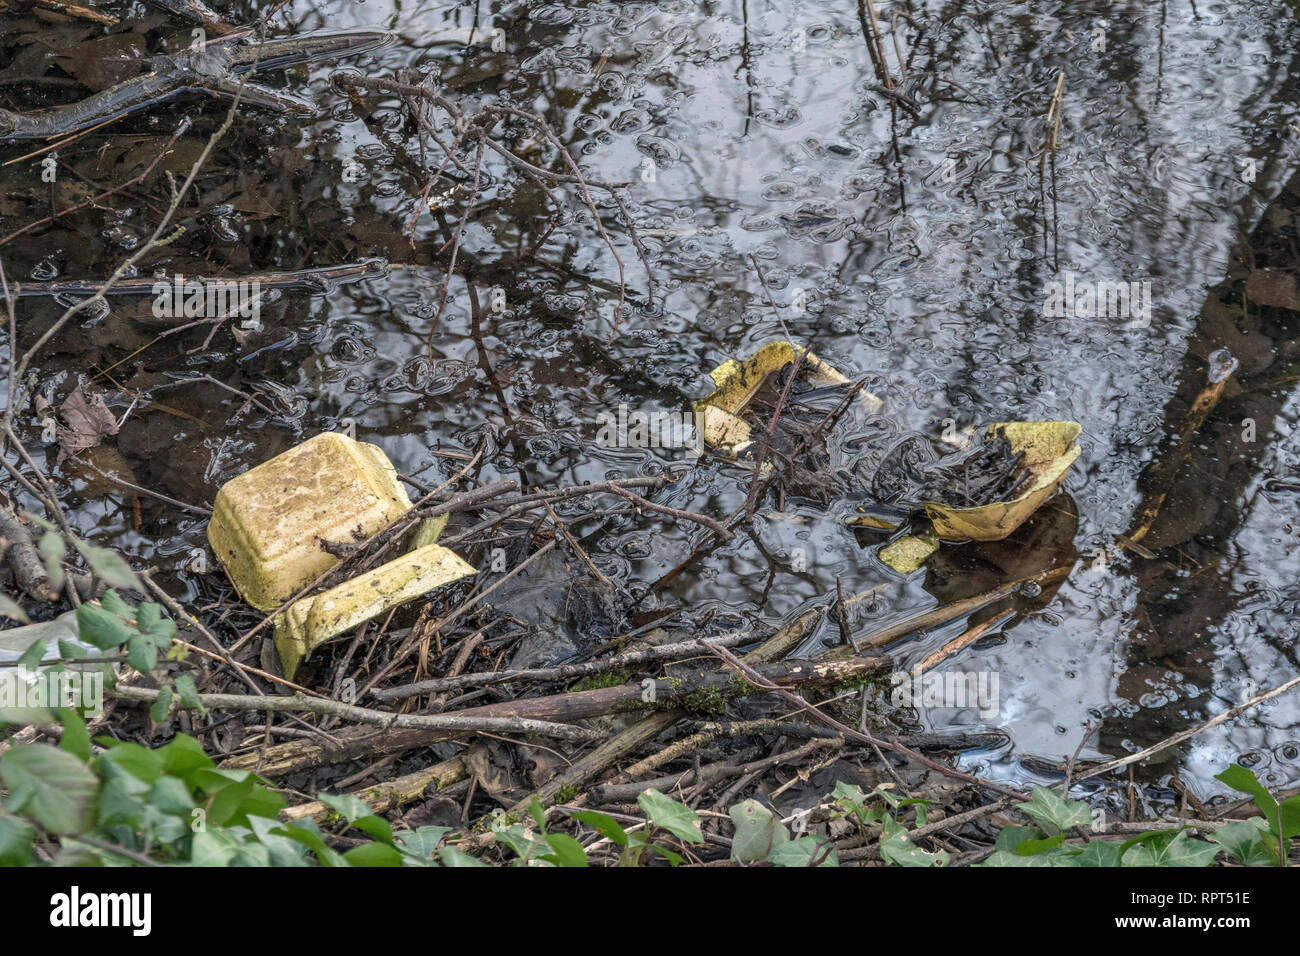 Plastic rubbish in countryside drainage ditch. Concept of UK plastic pollution. Takeaway food packaging, UK single-use plastic ban for foods. Stock Photo